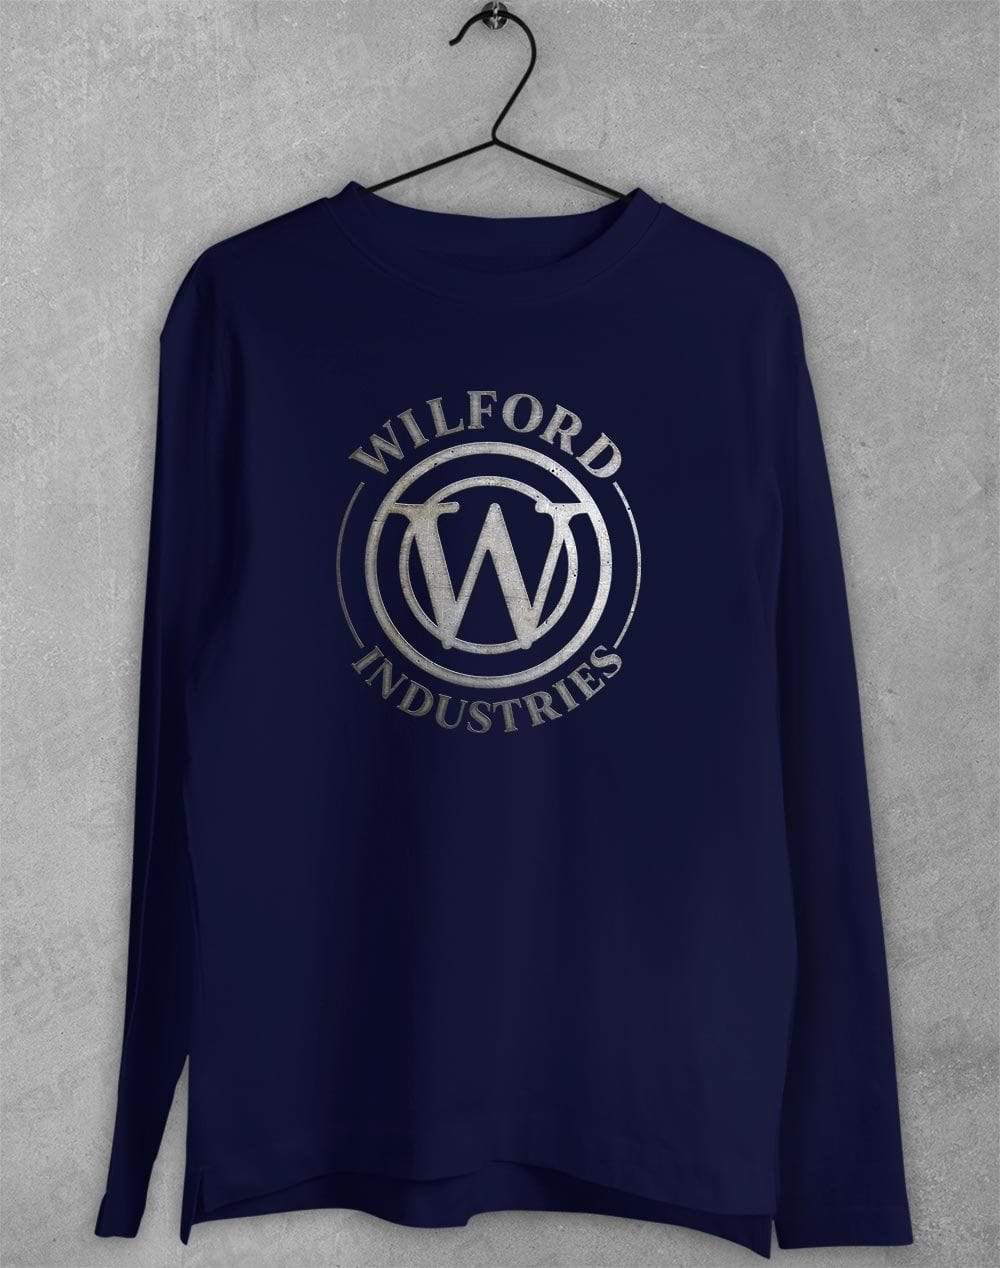 Wilford Industries Long Sleeve T-Shirt S / Navy  - Off World Tees